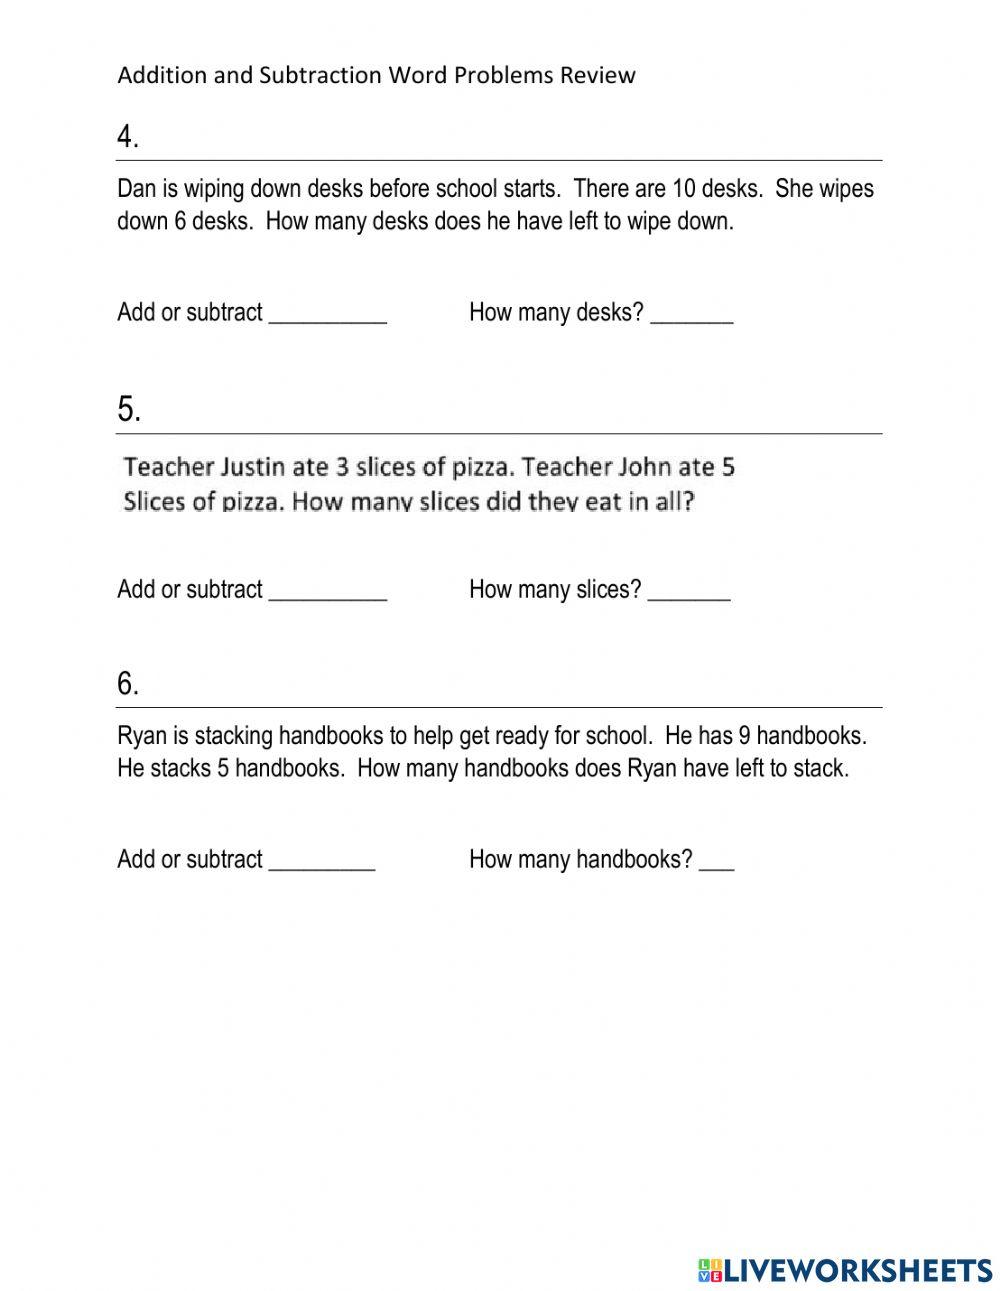 Add and Subtract word problems worksheet review